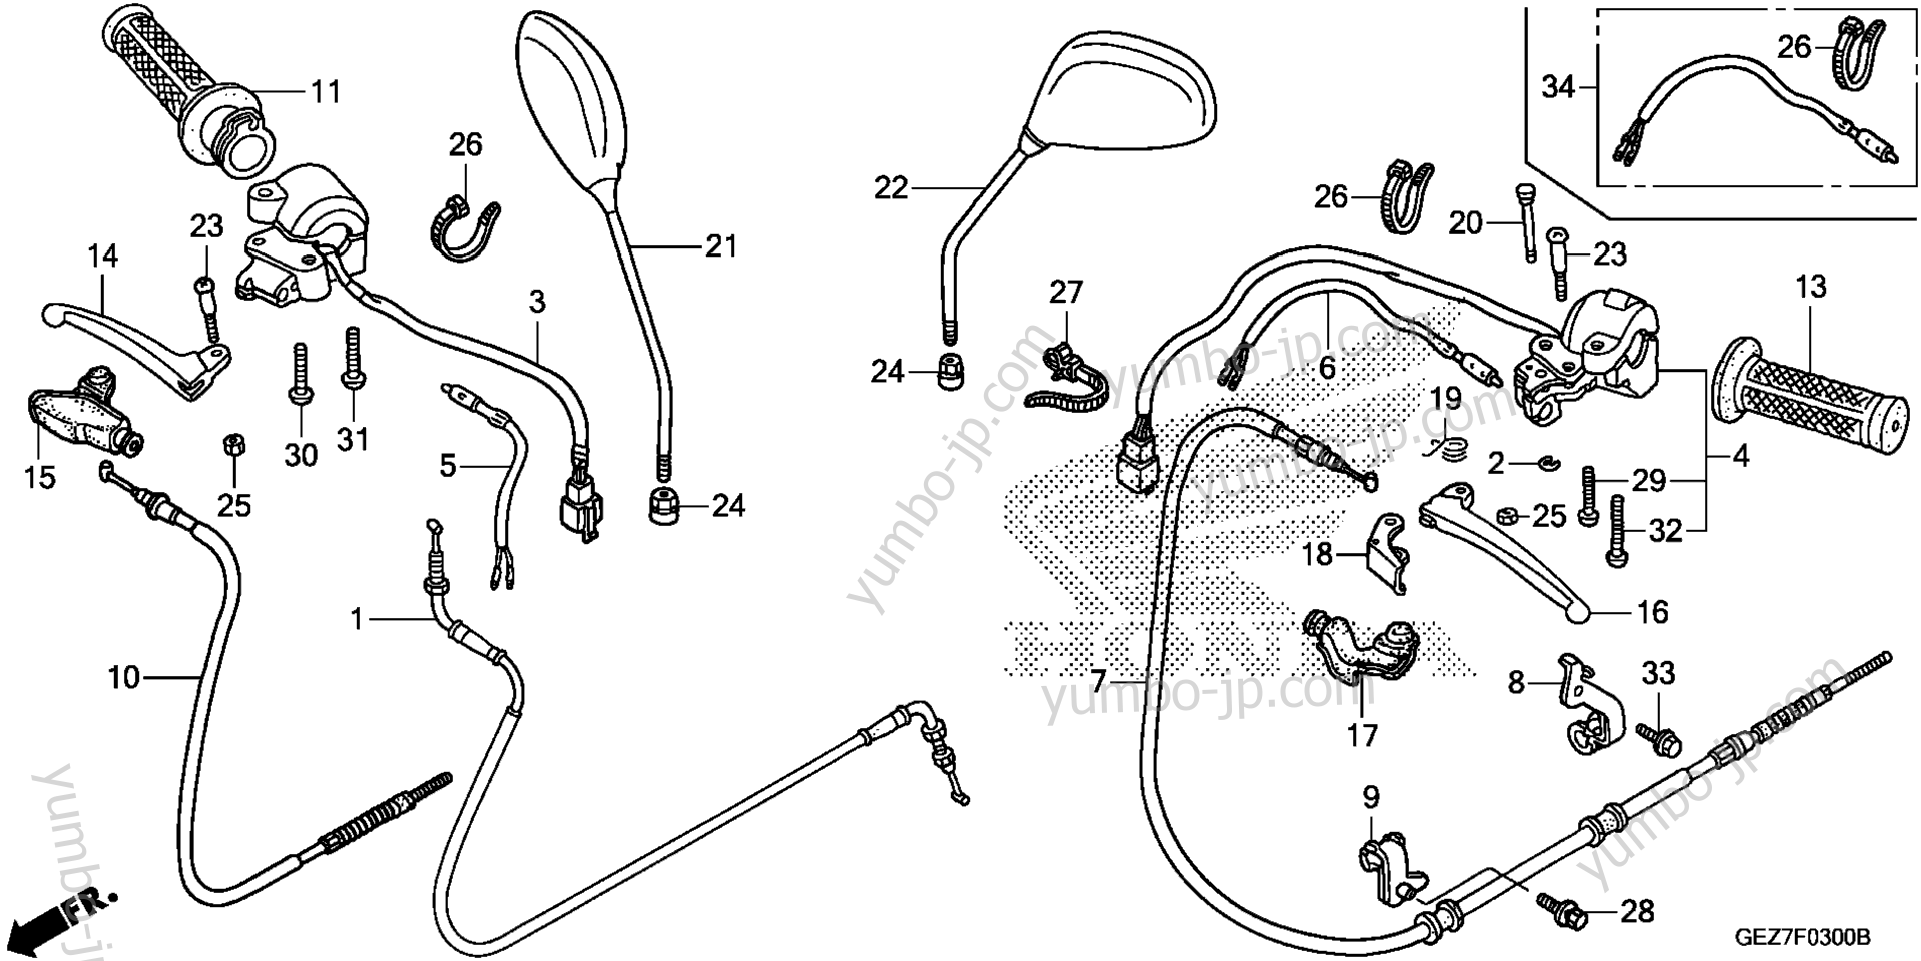 HANDLE LEVER / SWITCH / CABLE for scooters HONDA NPS50S A 2008 year